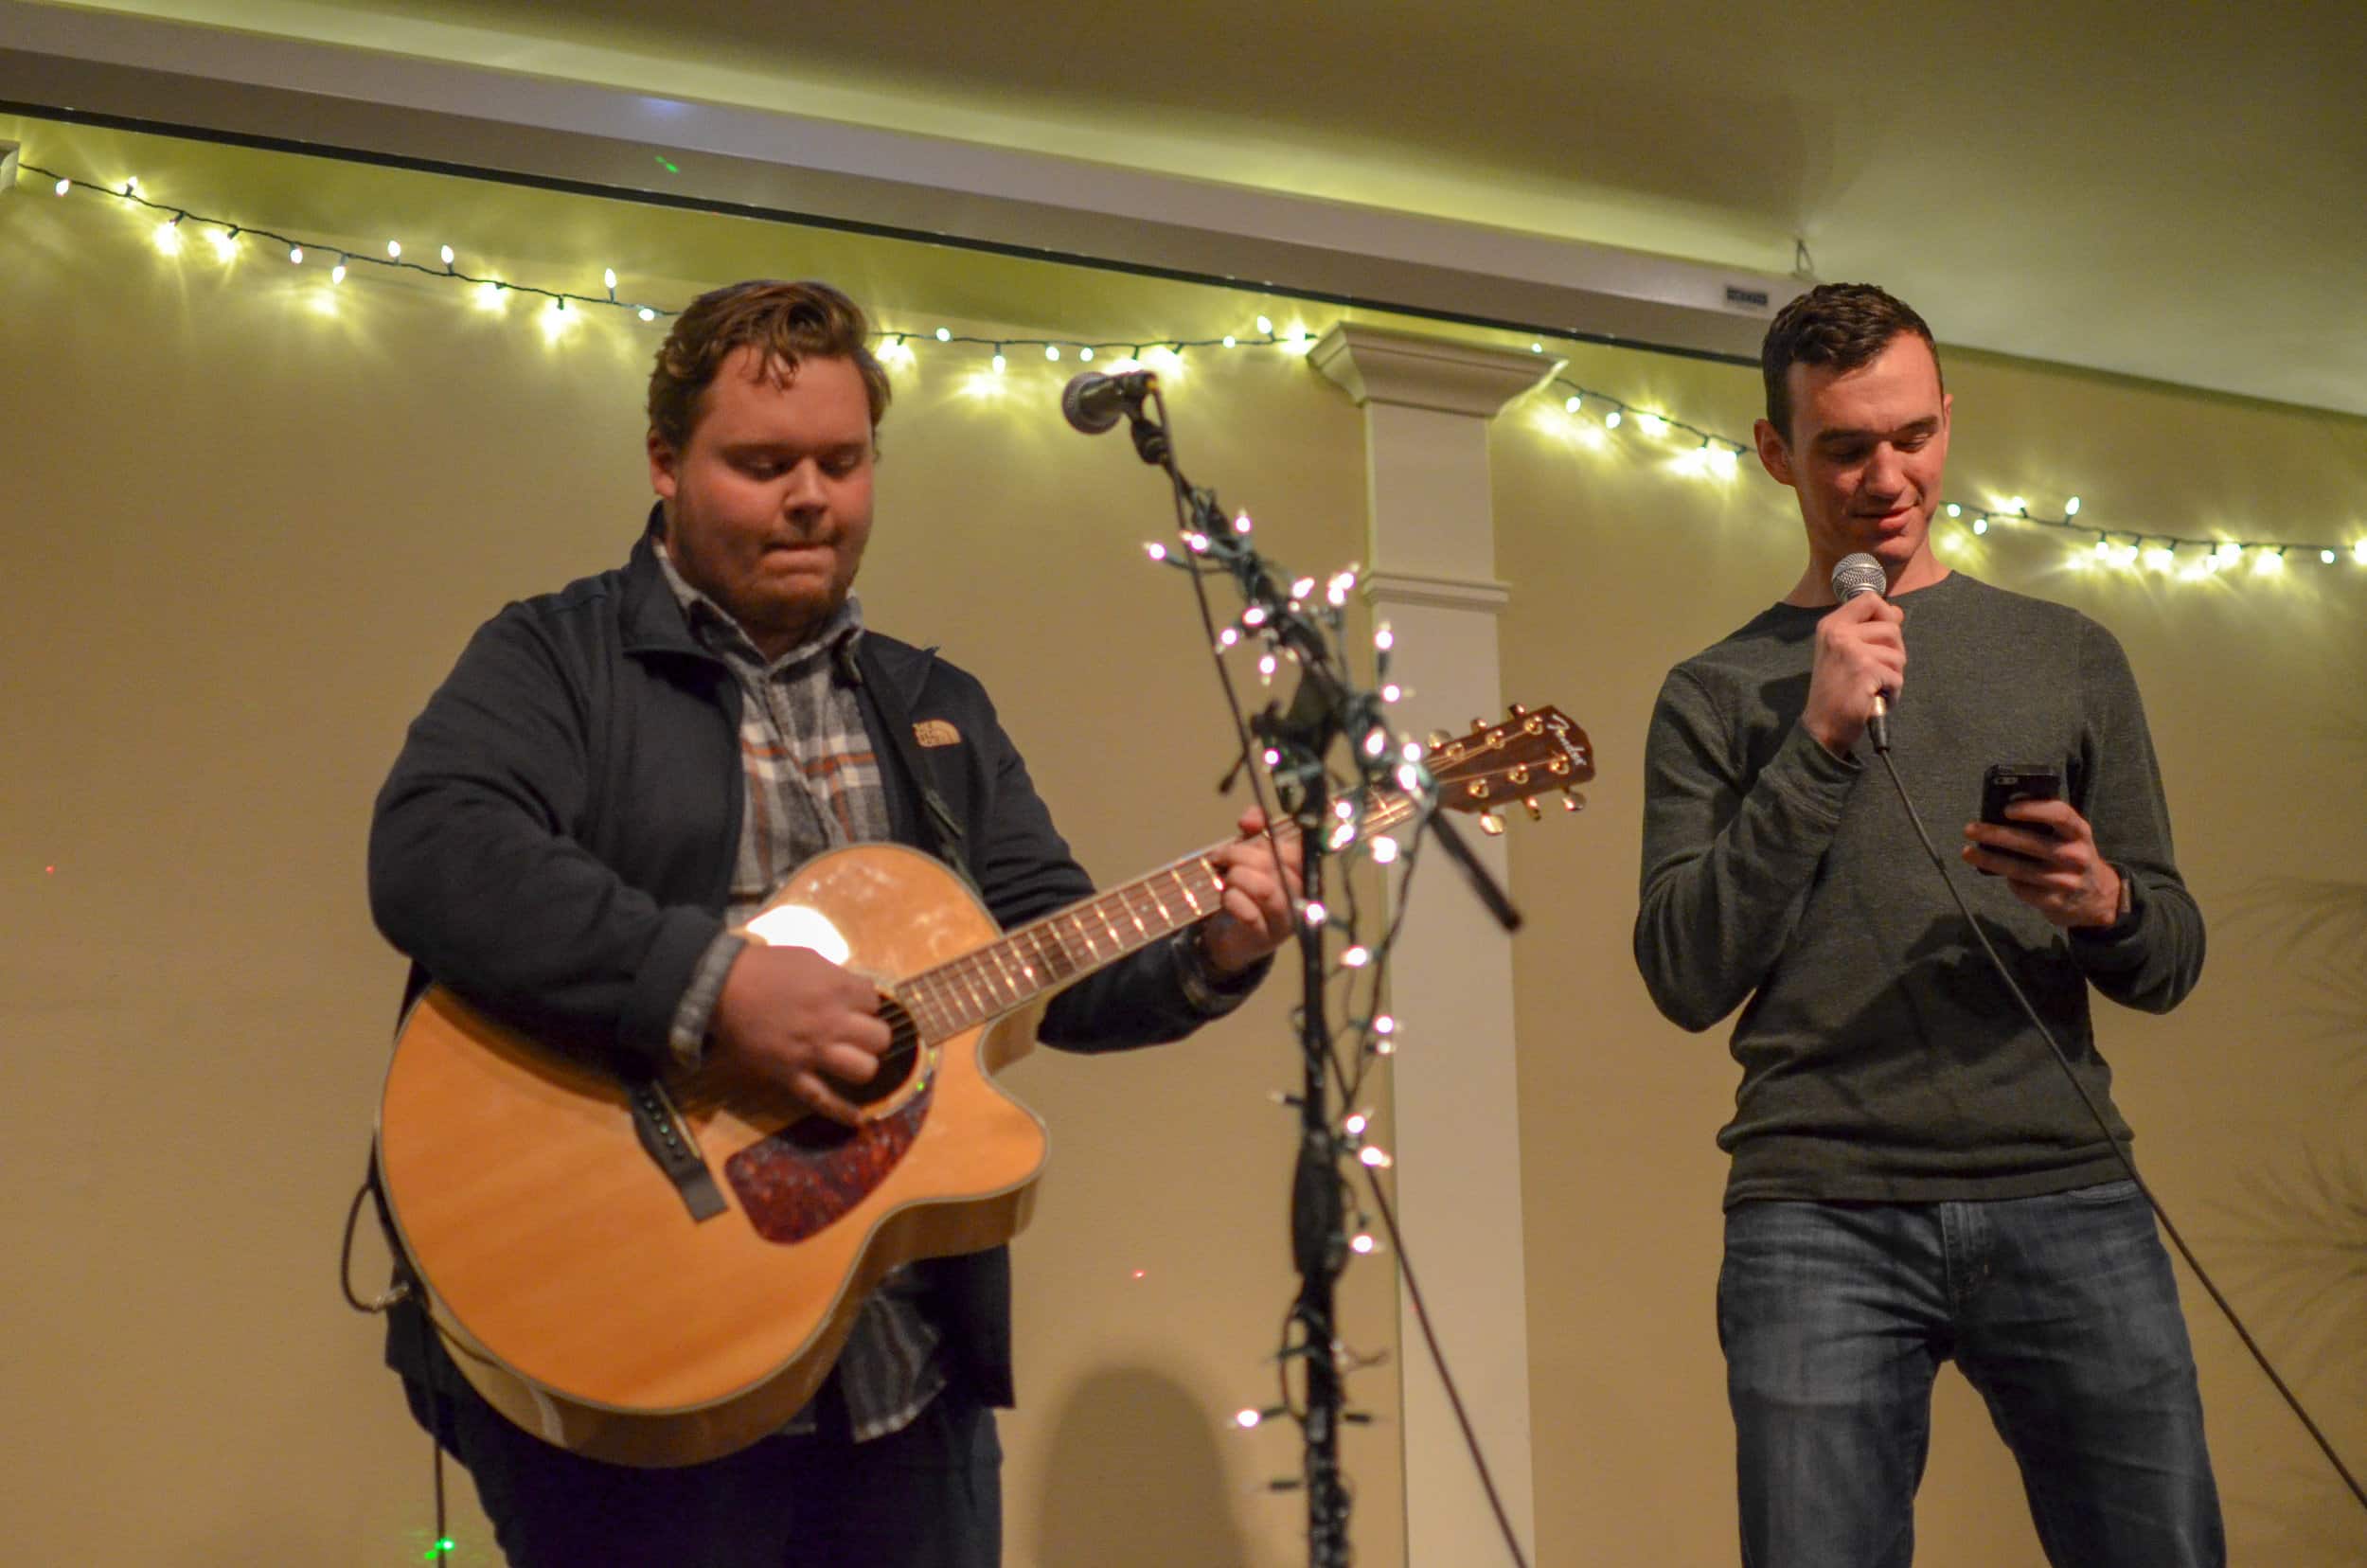 Jacob Thornton sings along with Blake Faulkner to Sailboat by Ben Rector as Faulkner plays the guitar.